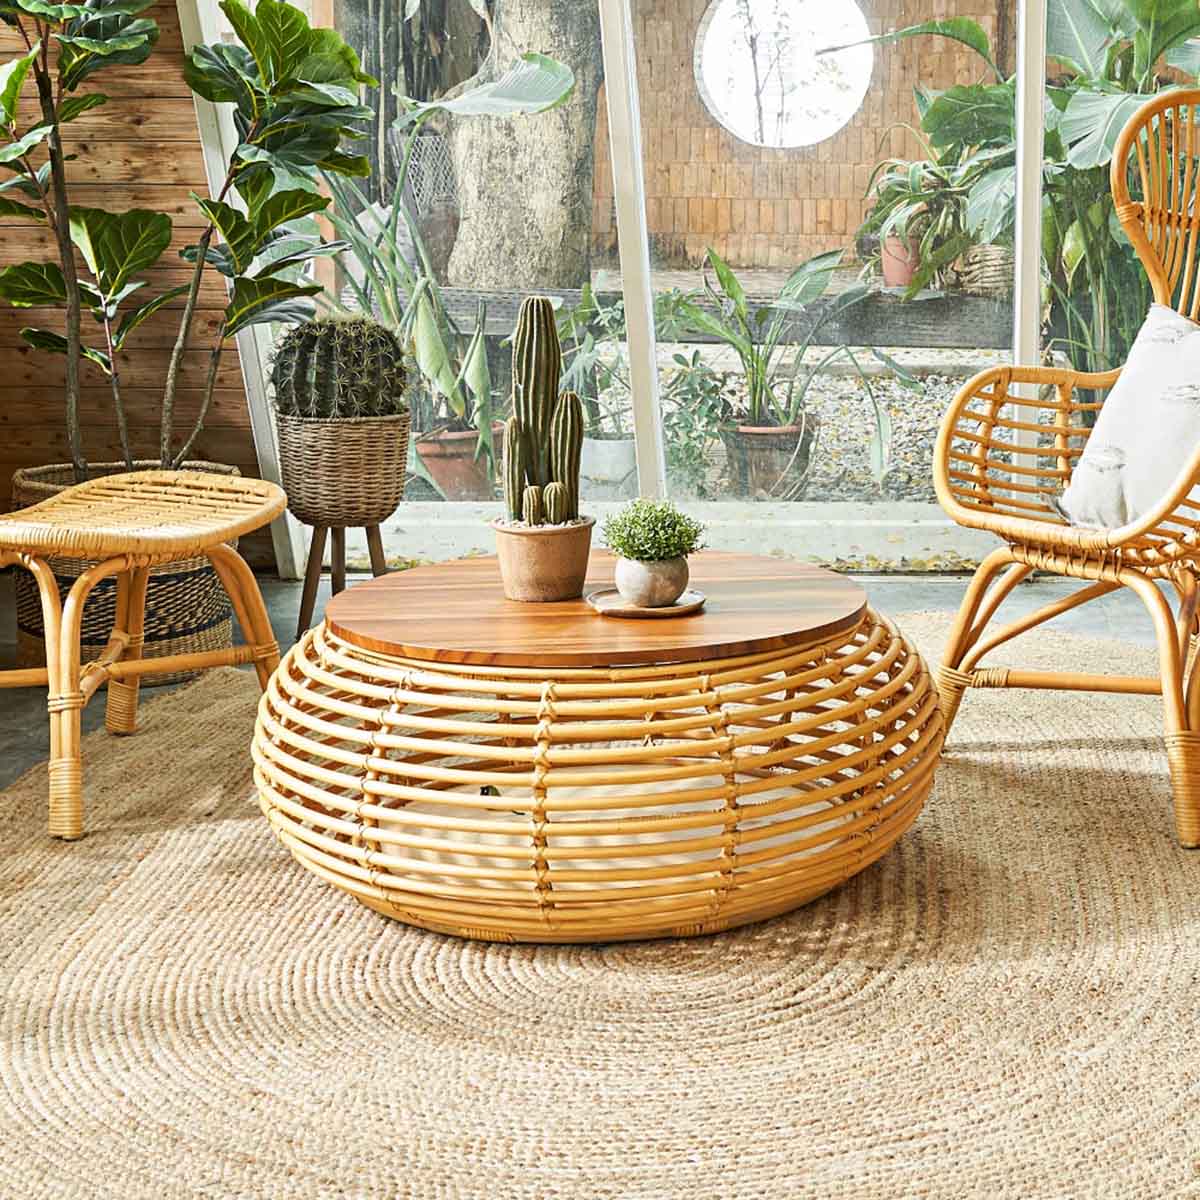 How To Build A Wicker Coffee Table